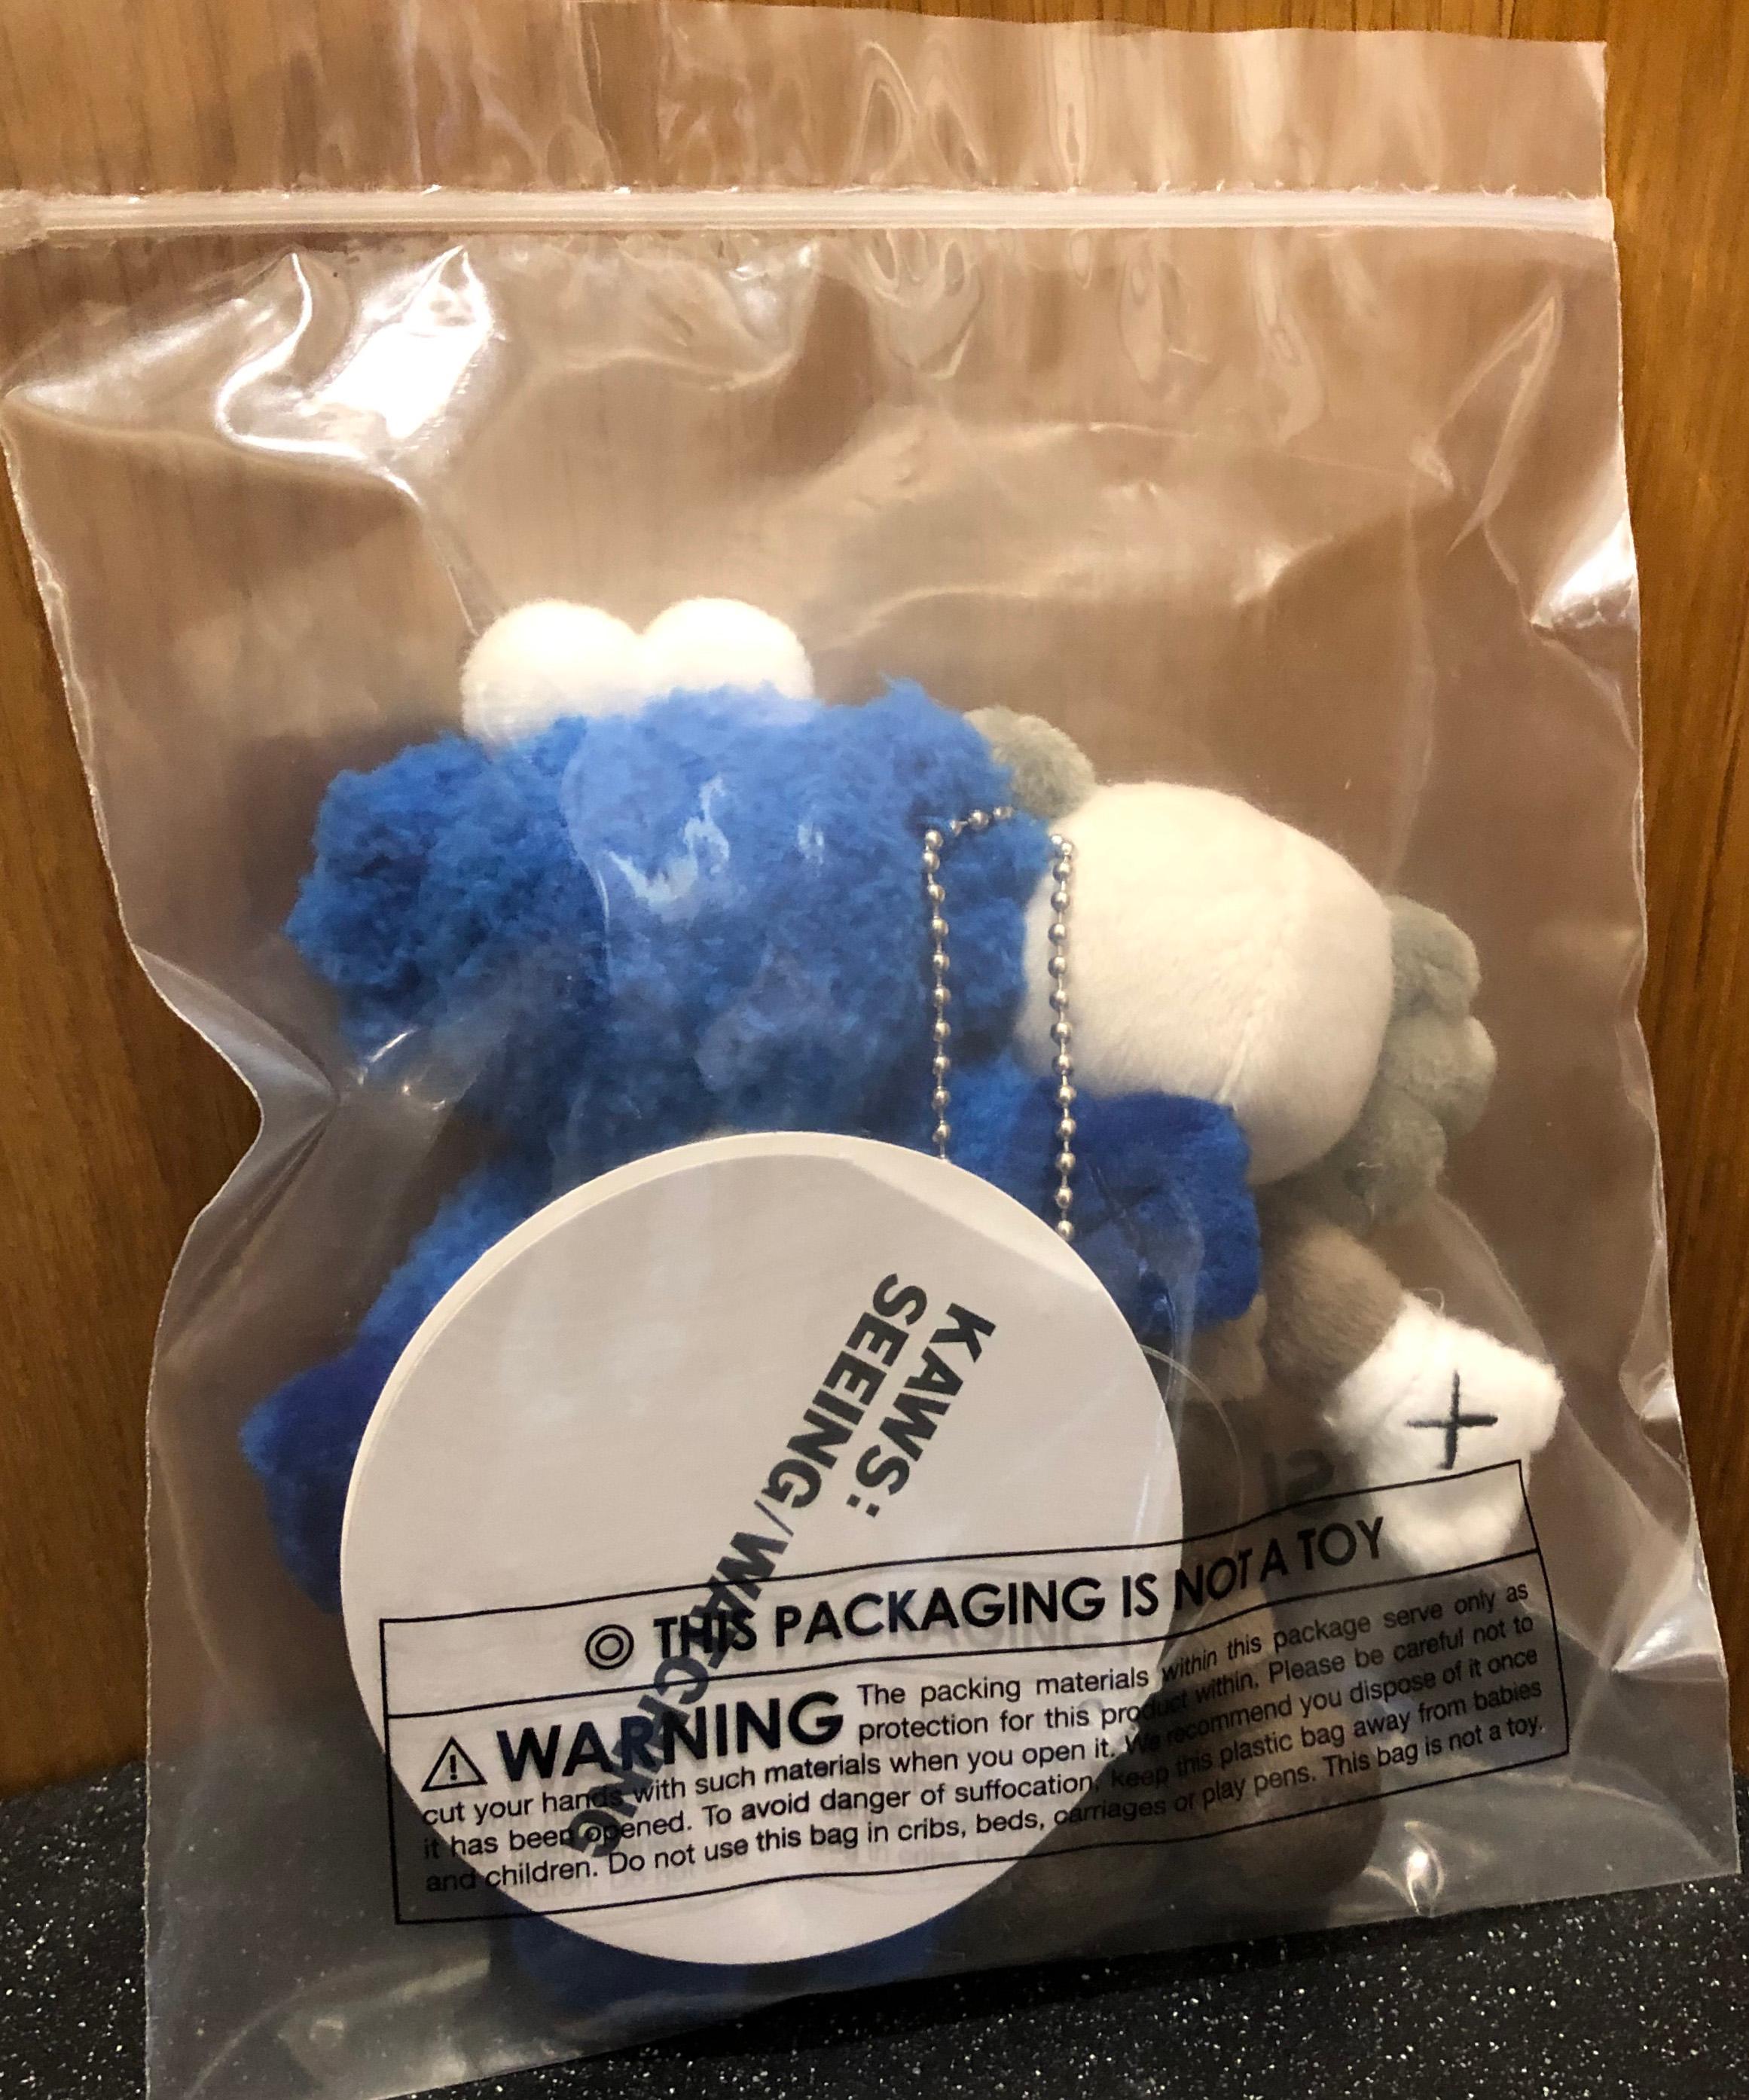 KAWS Seeing/Watching Plush Keychain 2018
New in its original packaging. Released in conjunction with the installation of the KAWS Seeing/Watching sculpture in Hunan, China. The plush figurines feature the well known Companion and BFF arm-in-arm, and